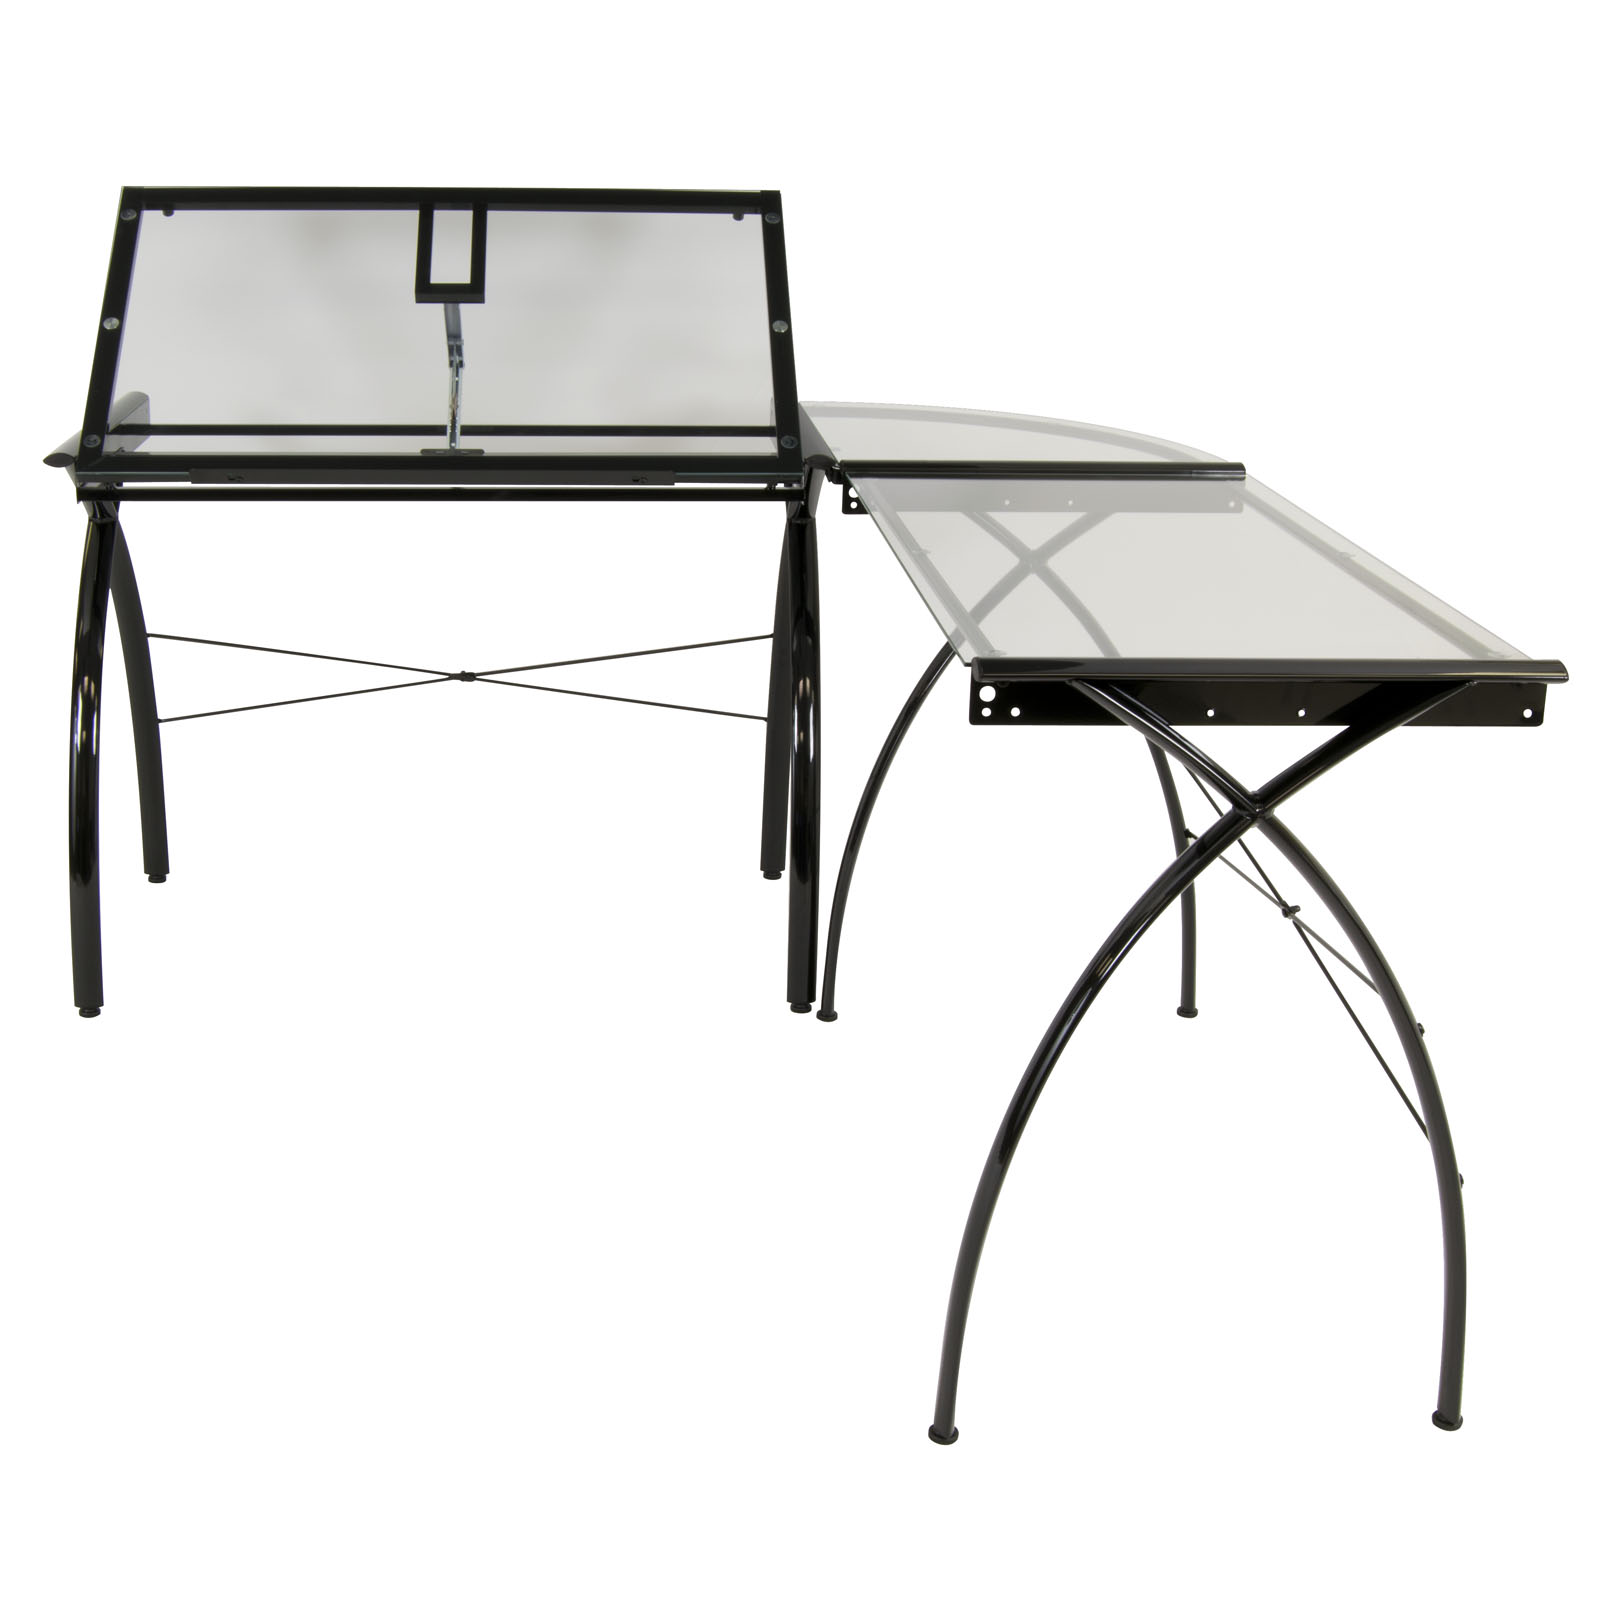 Futura L Shaped Workcenter With Tilting Top Drafting Desk In Black